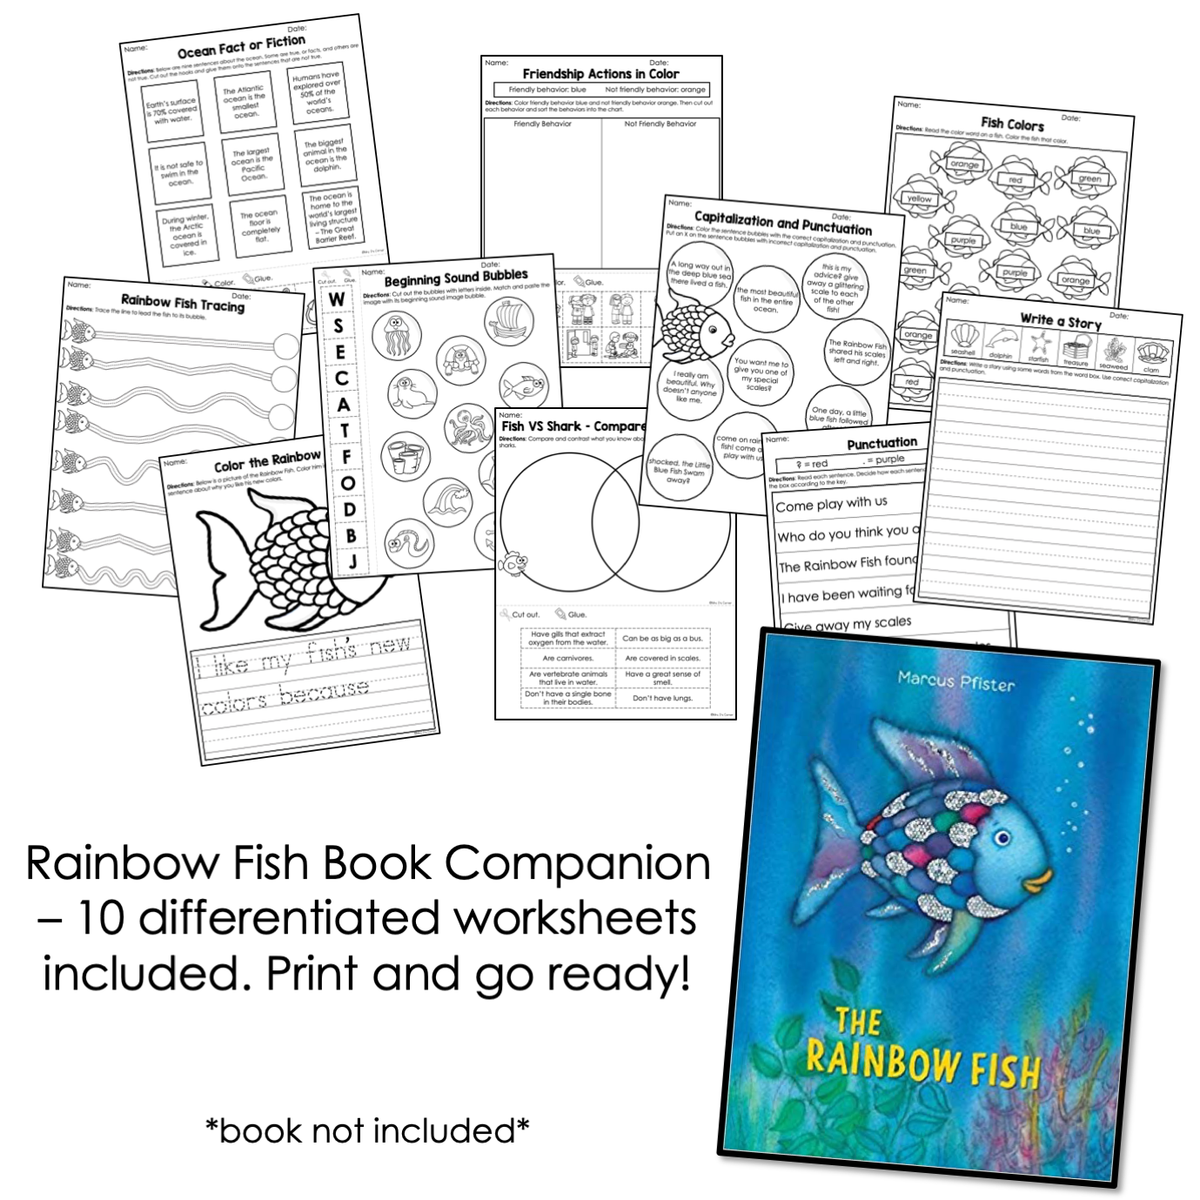 Rainbow Fish Classroom Companion, Book by Marcus Pfister, Burkhard Fries, Official Publisher Page